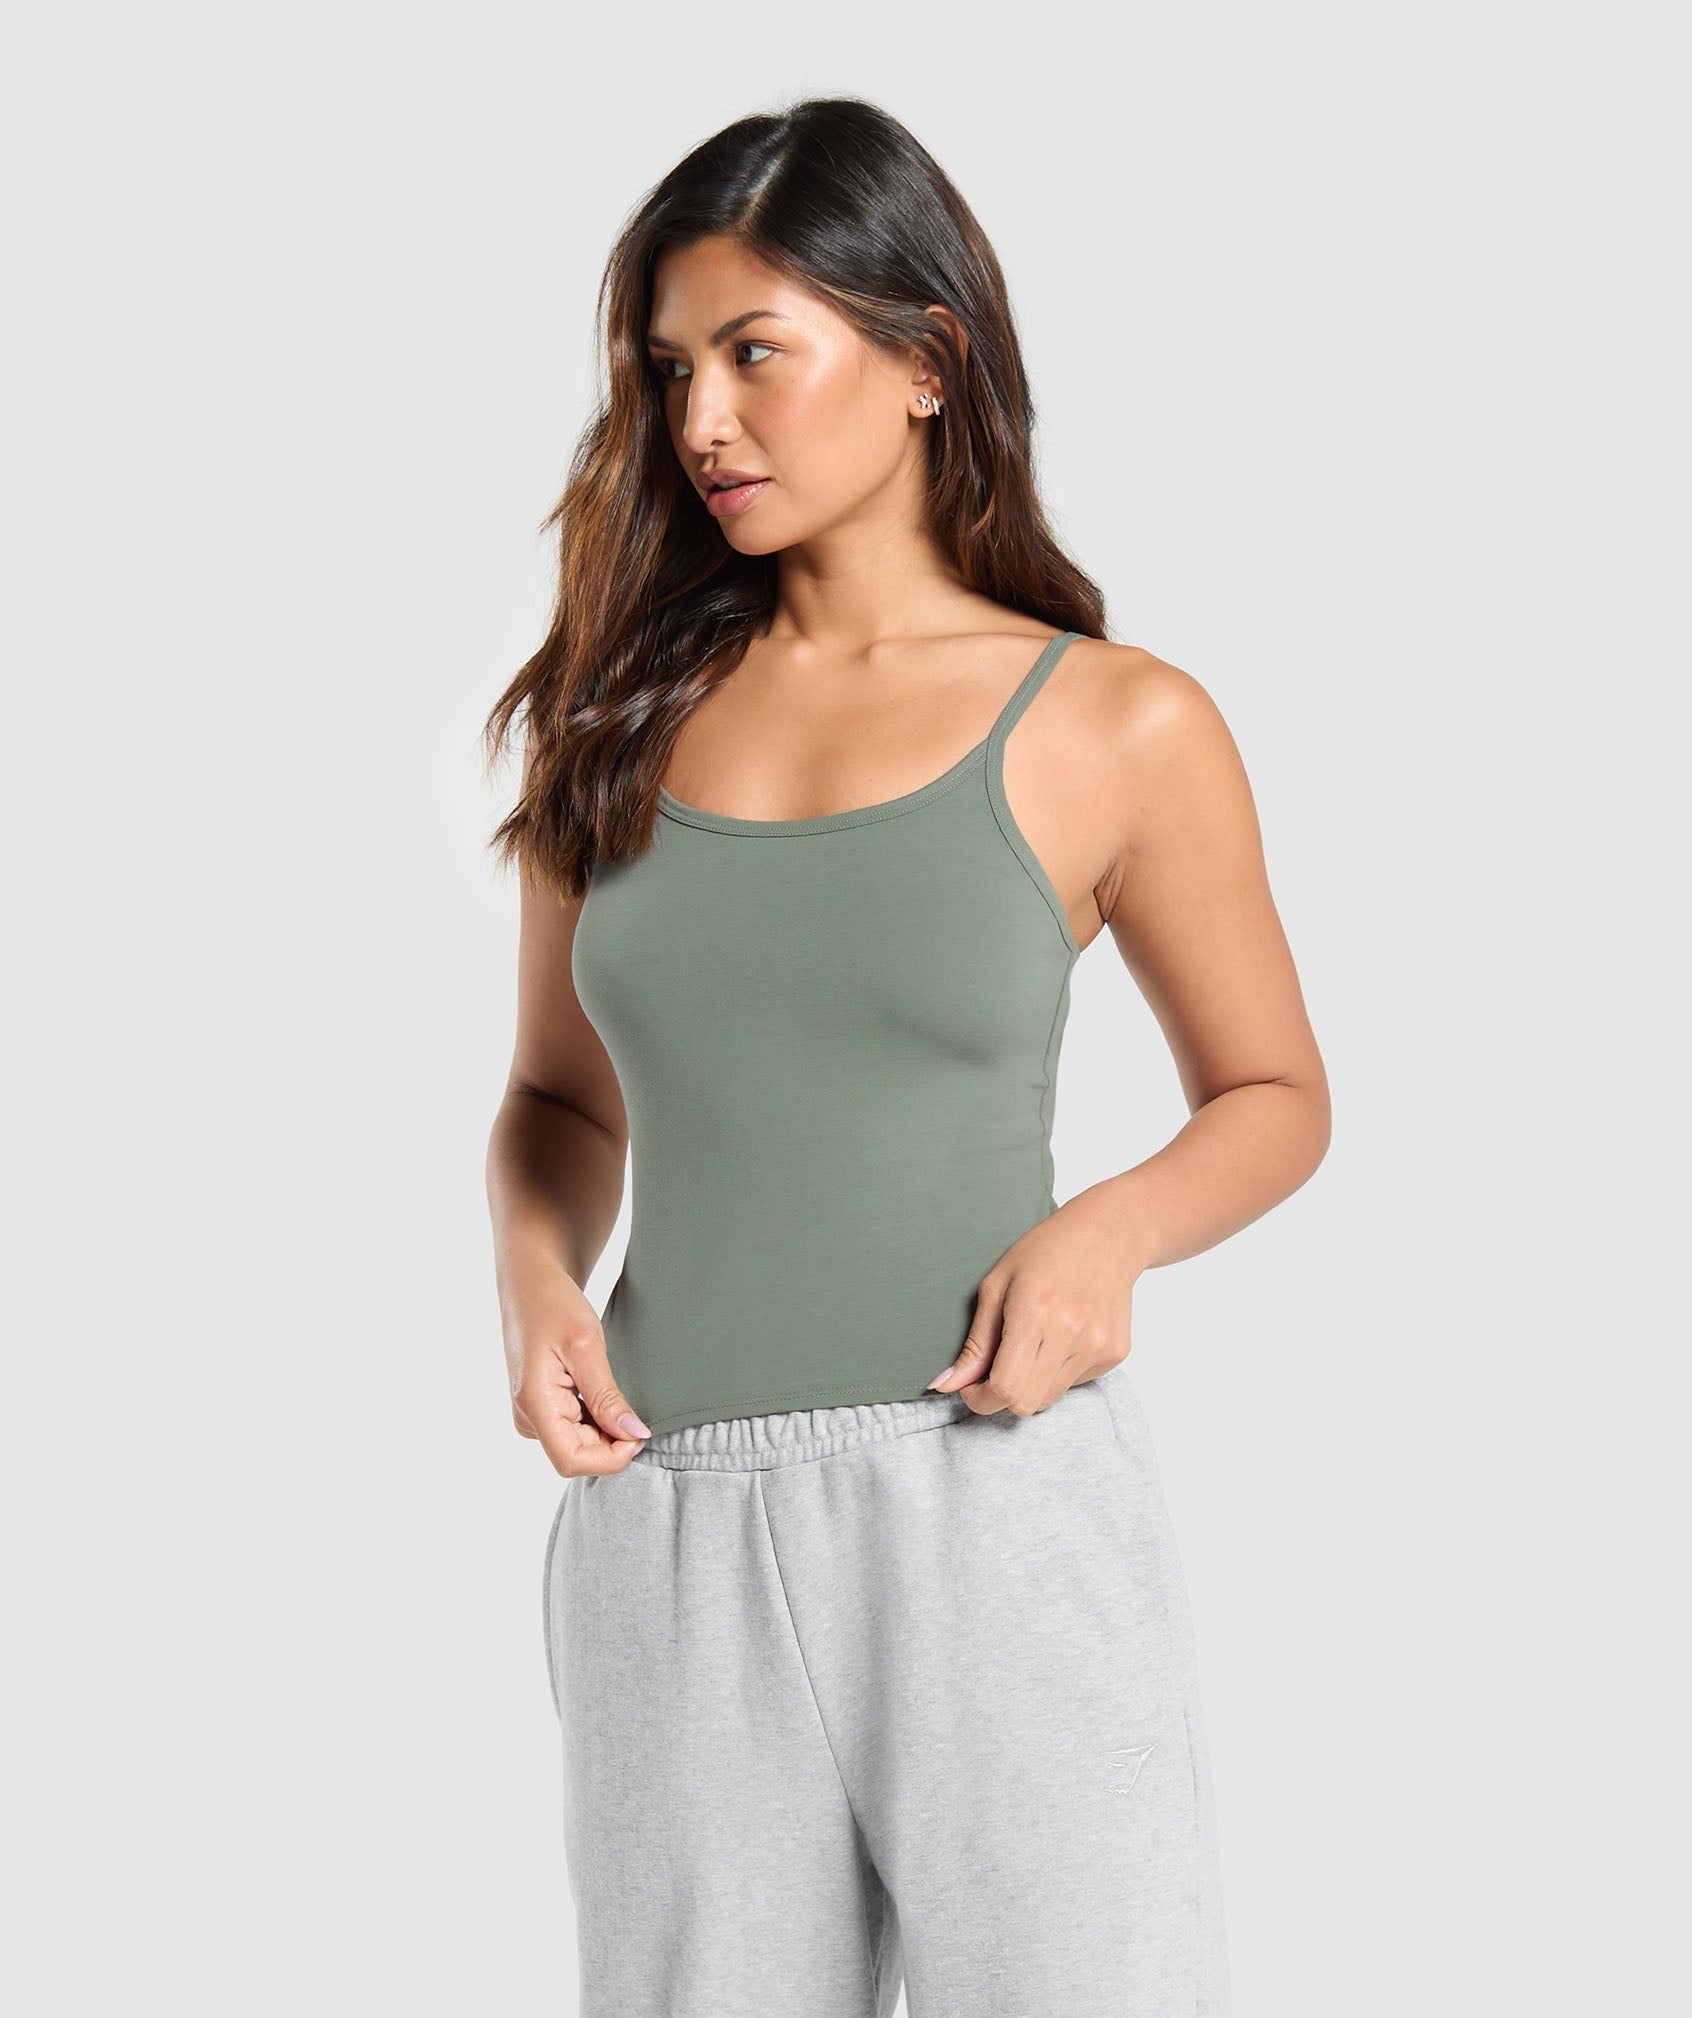 Cotton Cami Tank in Unit Green - view 3